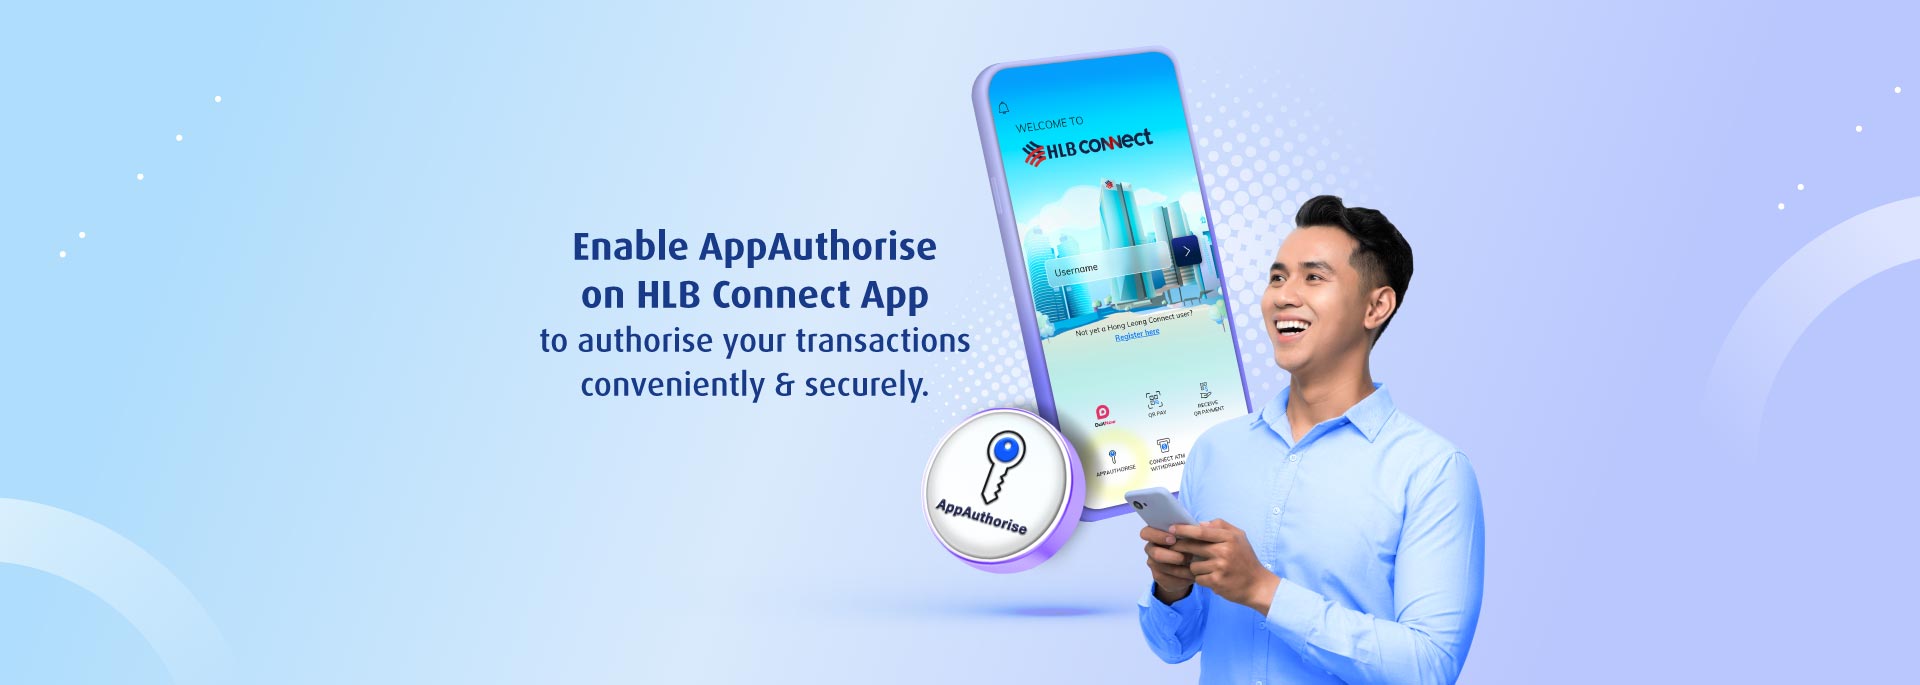 AppAuthorise on HLB Connect App to get RM5 Cashback